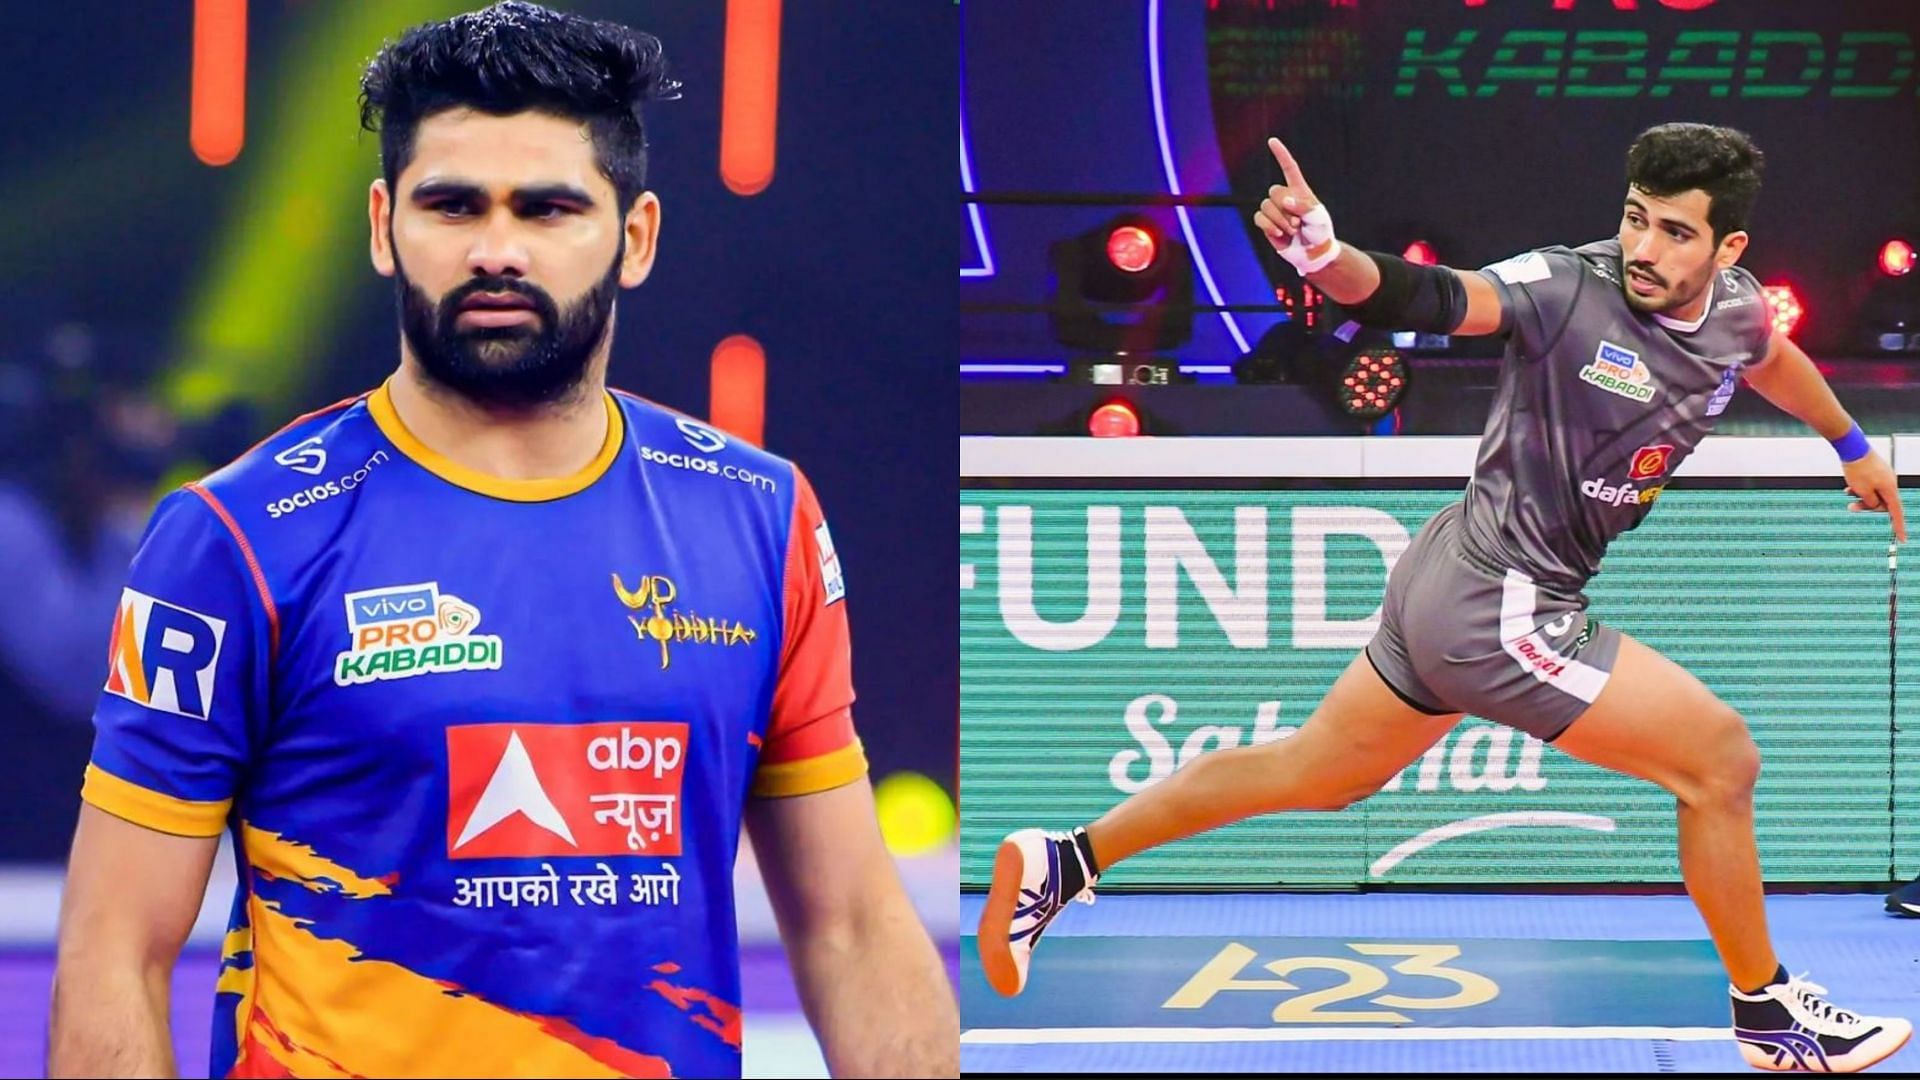 UP Yoddha and Haryana Steelers are among the top contenders to win Pro Kabaddi 2022 (Image: Pro Kabaddi/Instagram)